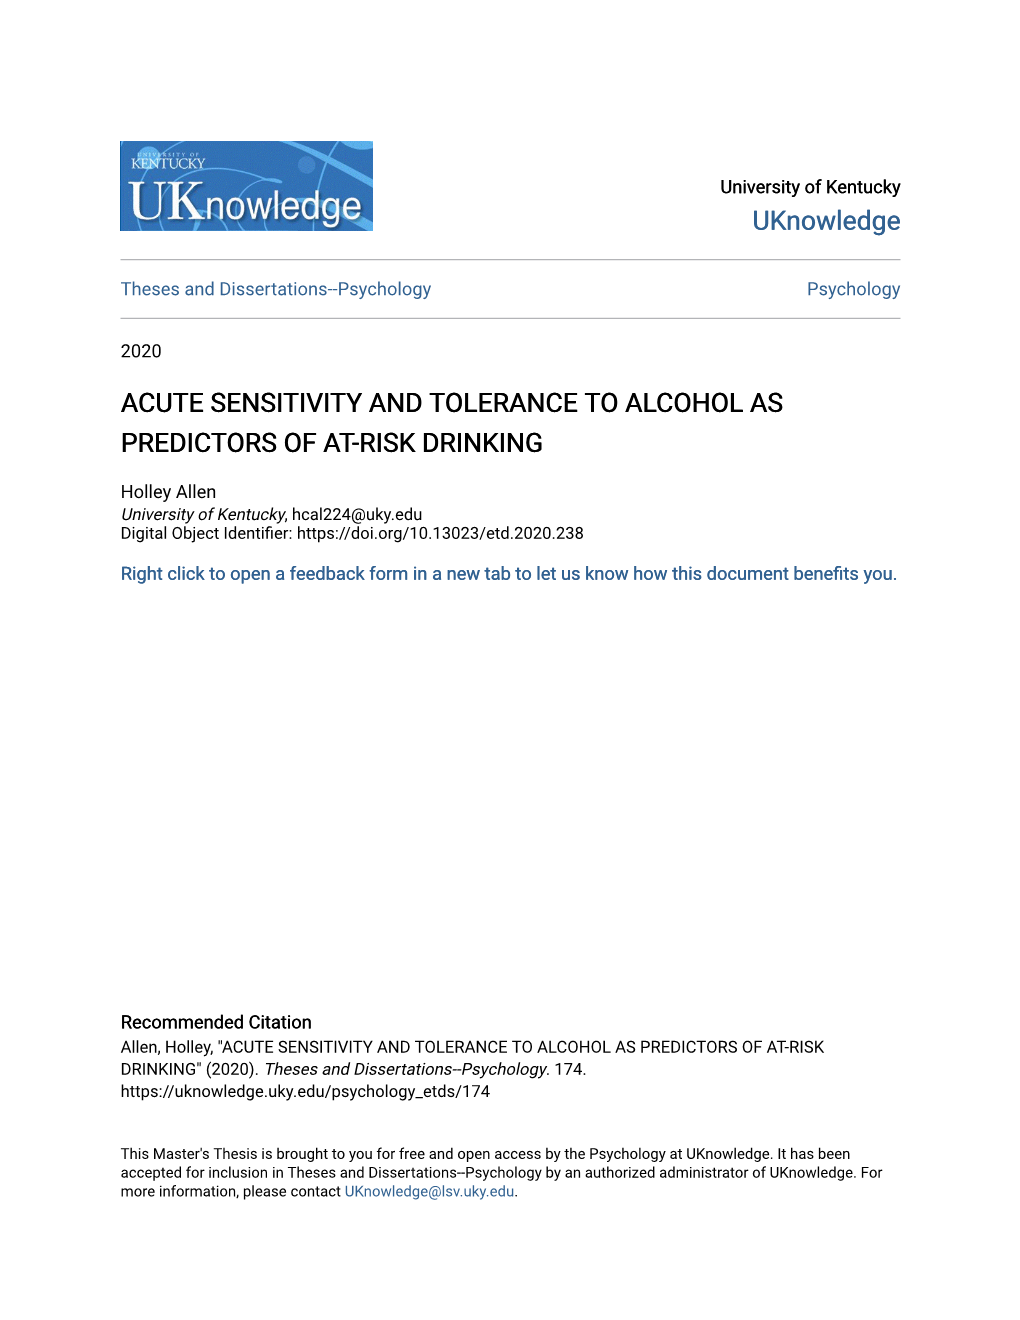 Acute Sensitivity and Tolerance to Alcohol As Predictors of At-Risk Drinking